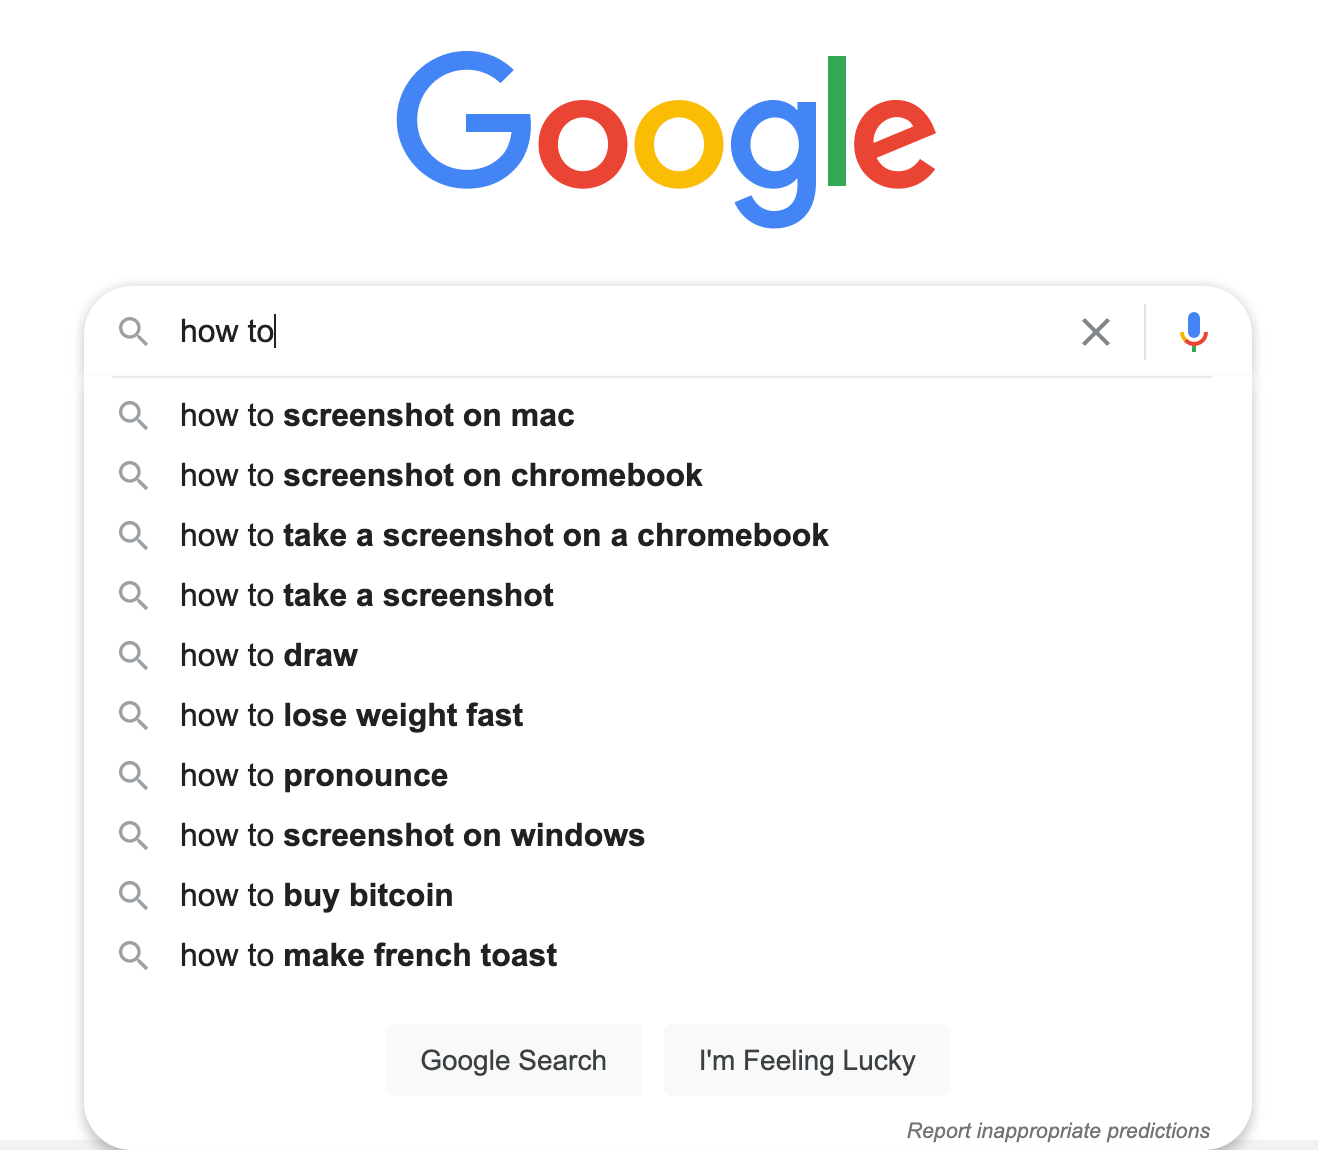 someone searching "how to" on Google